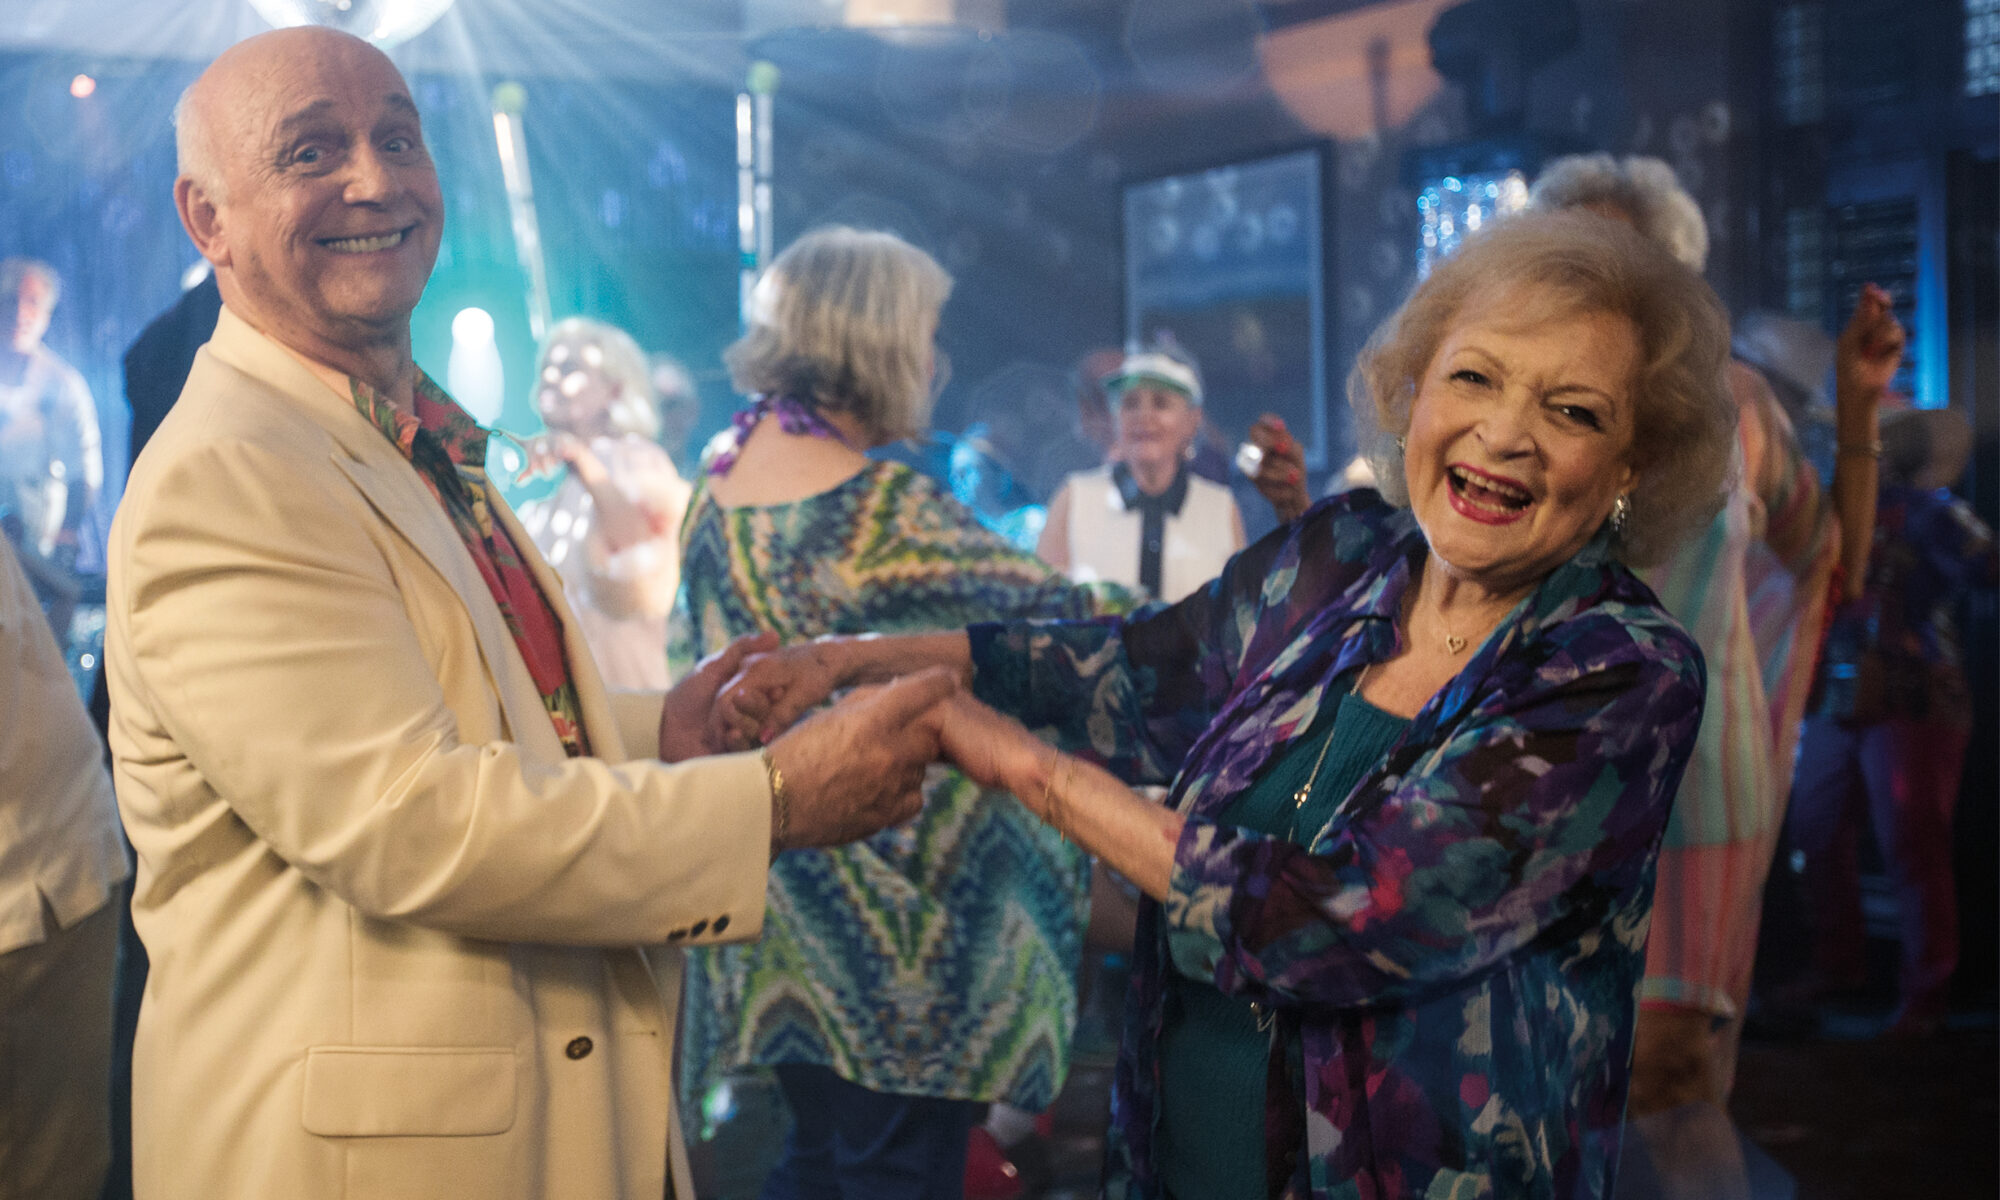 Air New Zealand safety video - Betty White with Gavin MacLeod in ball room